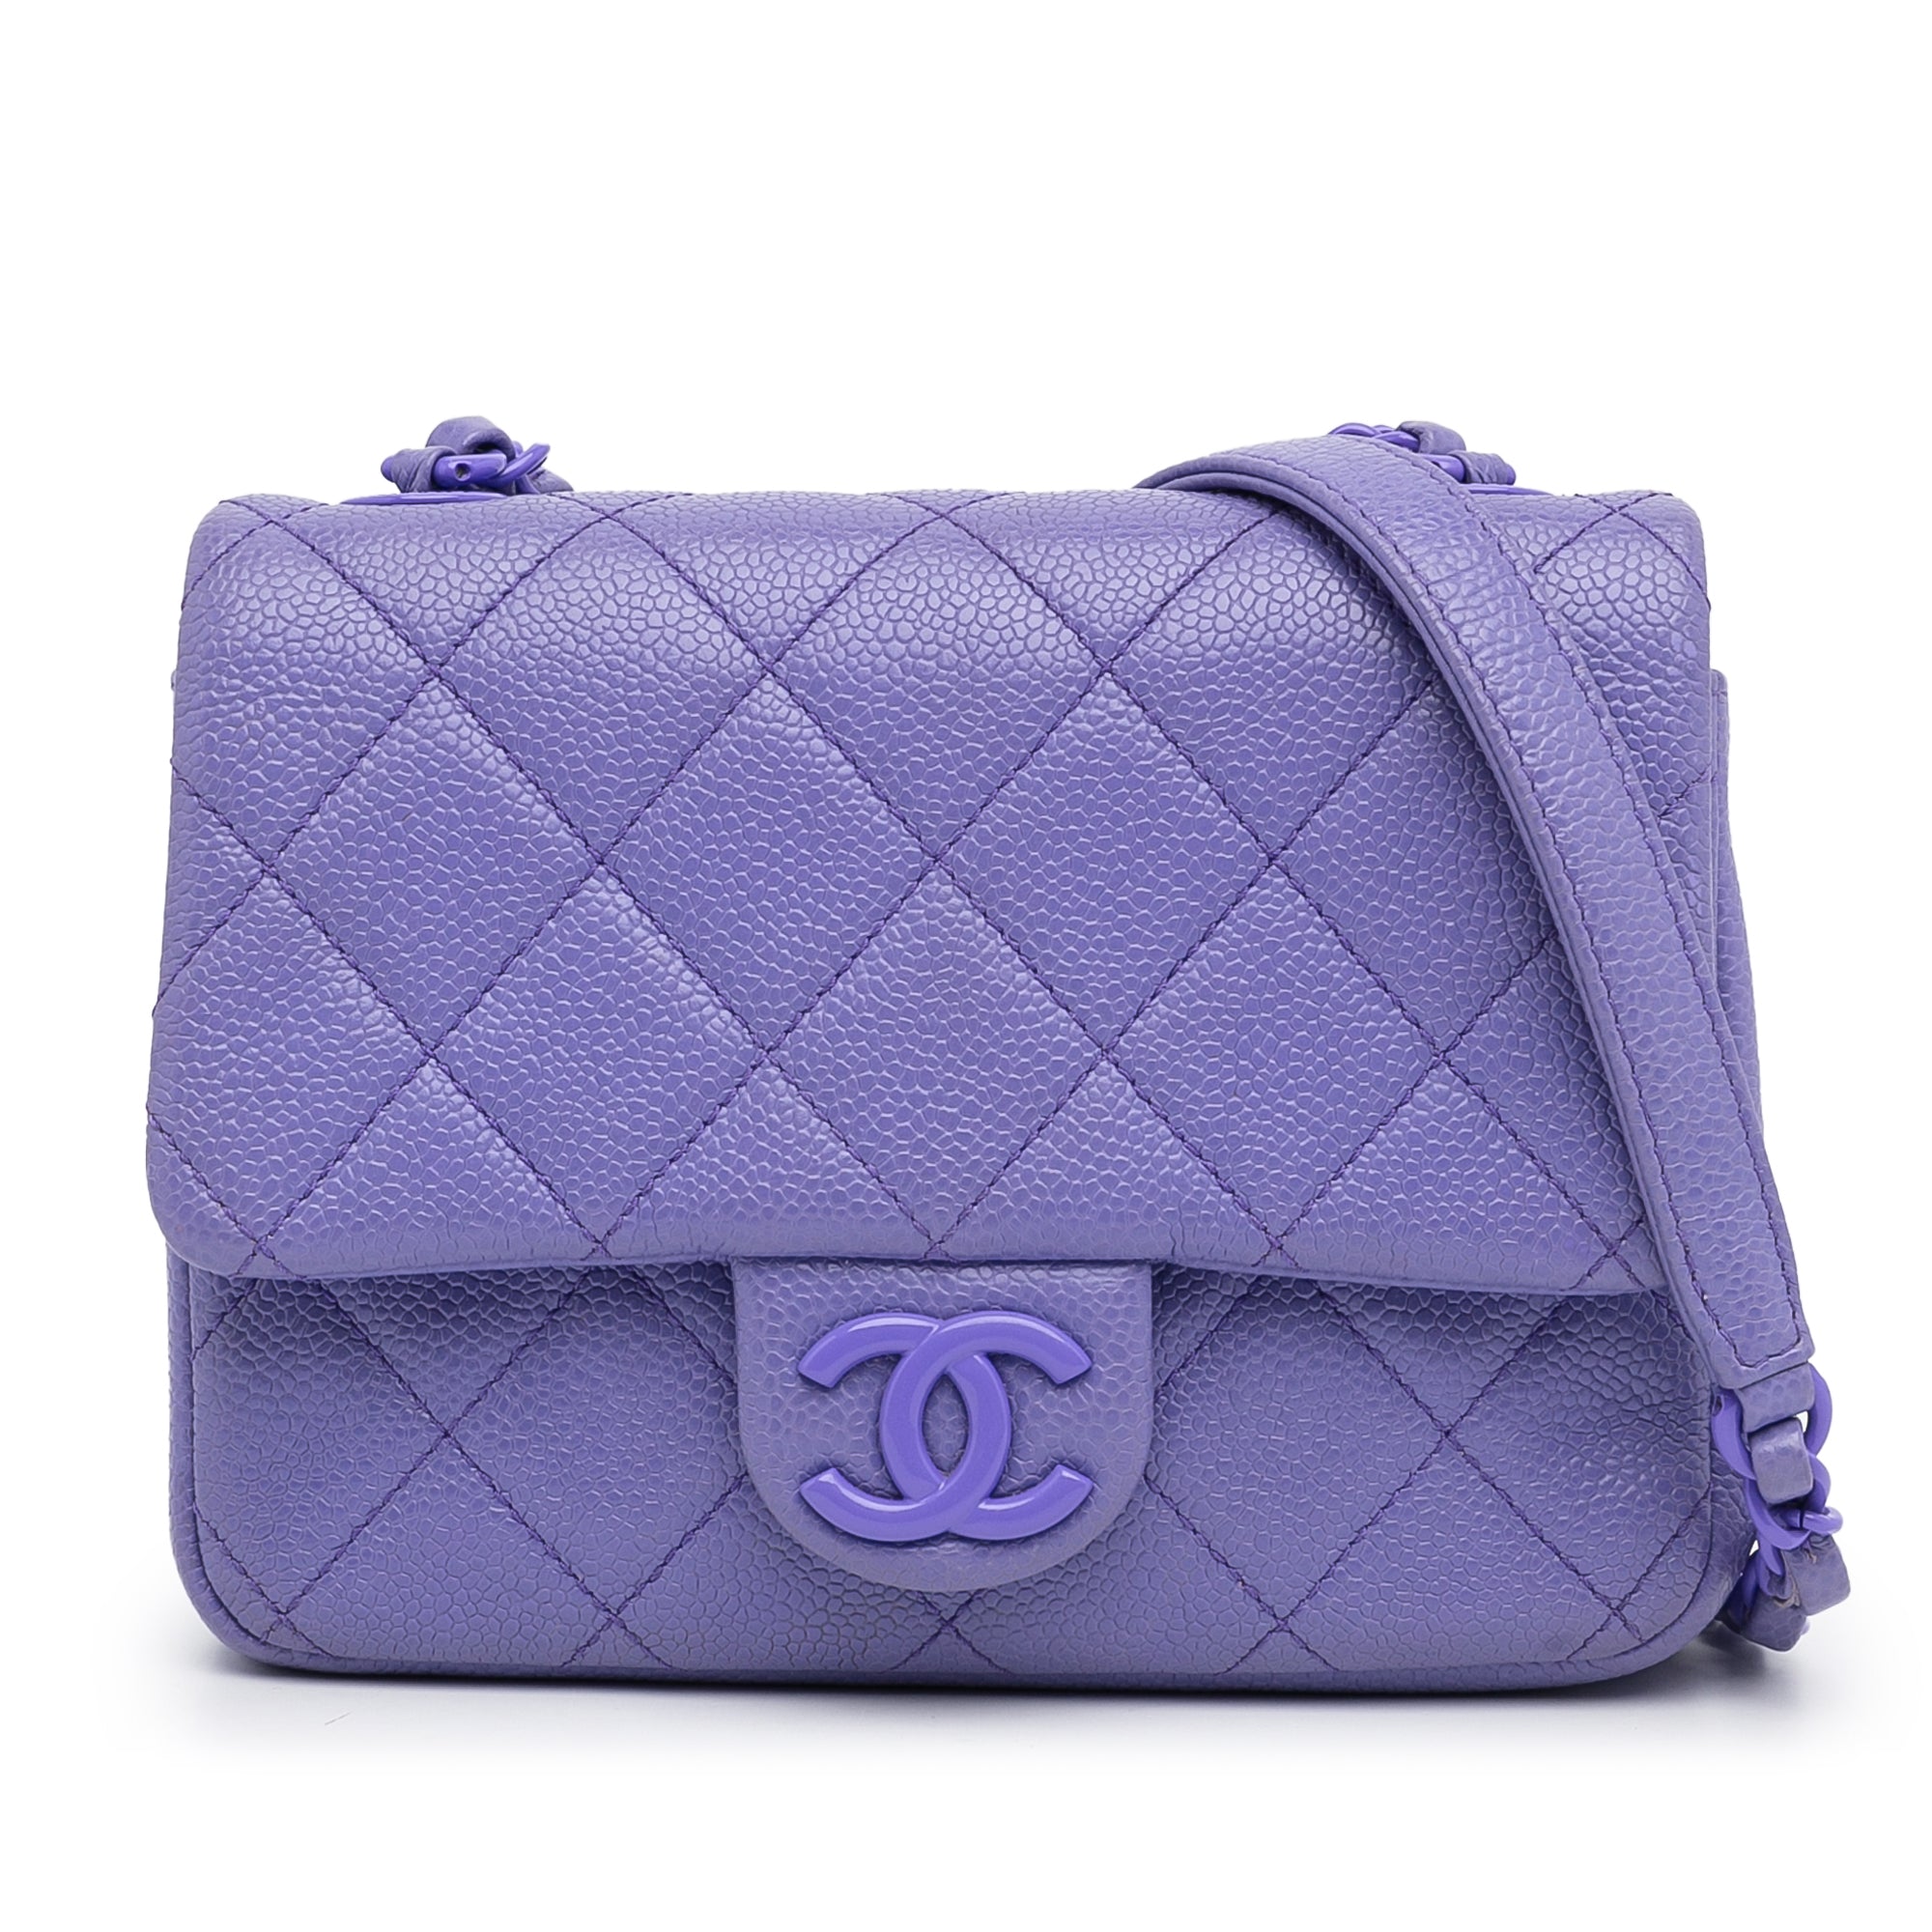 chanel classic colors